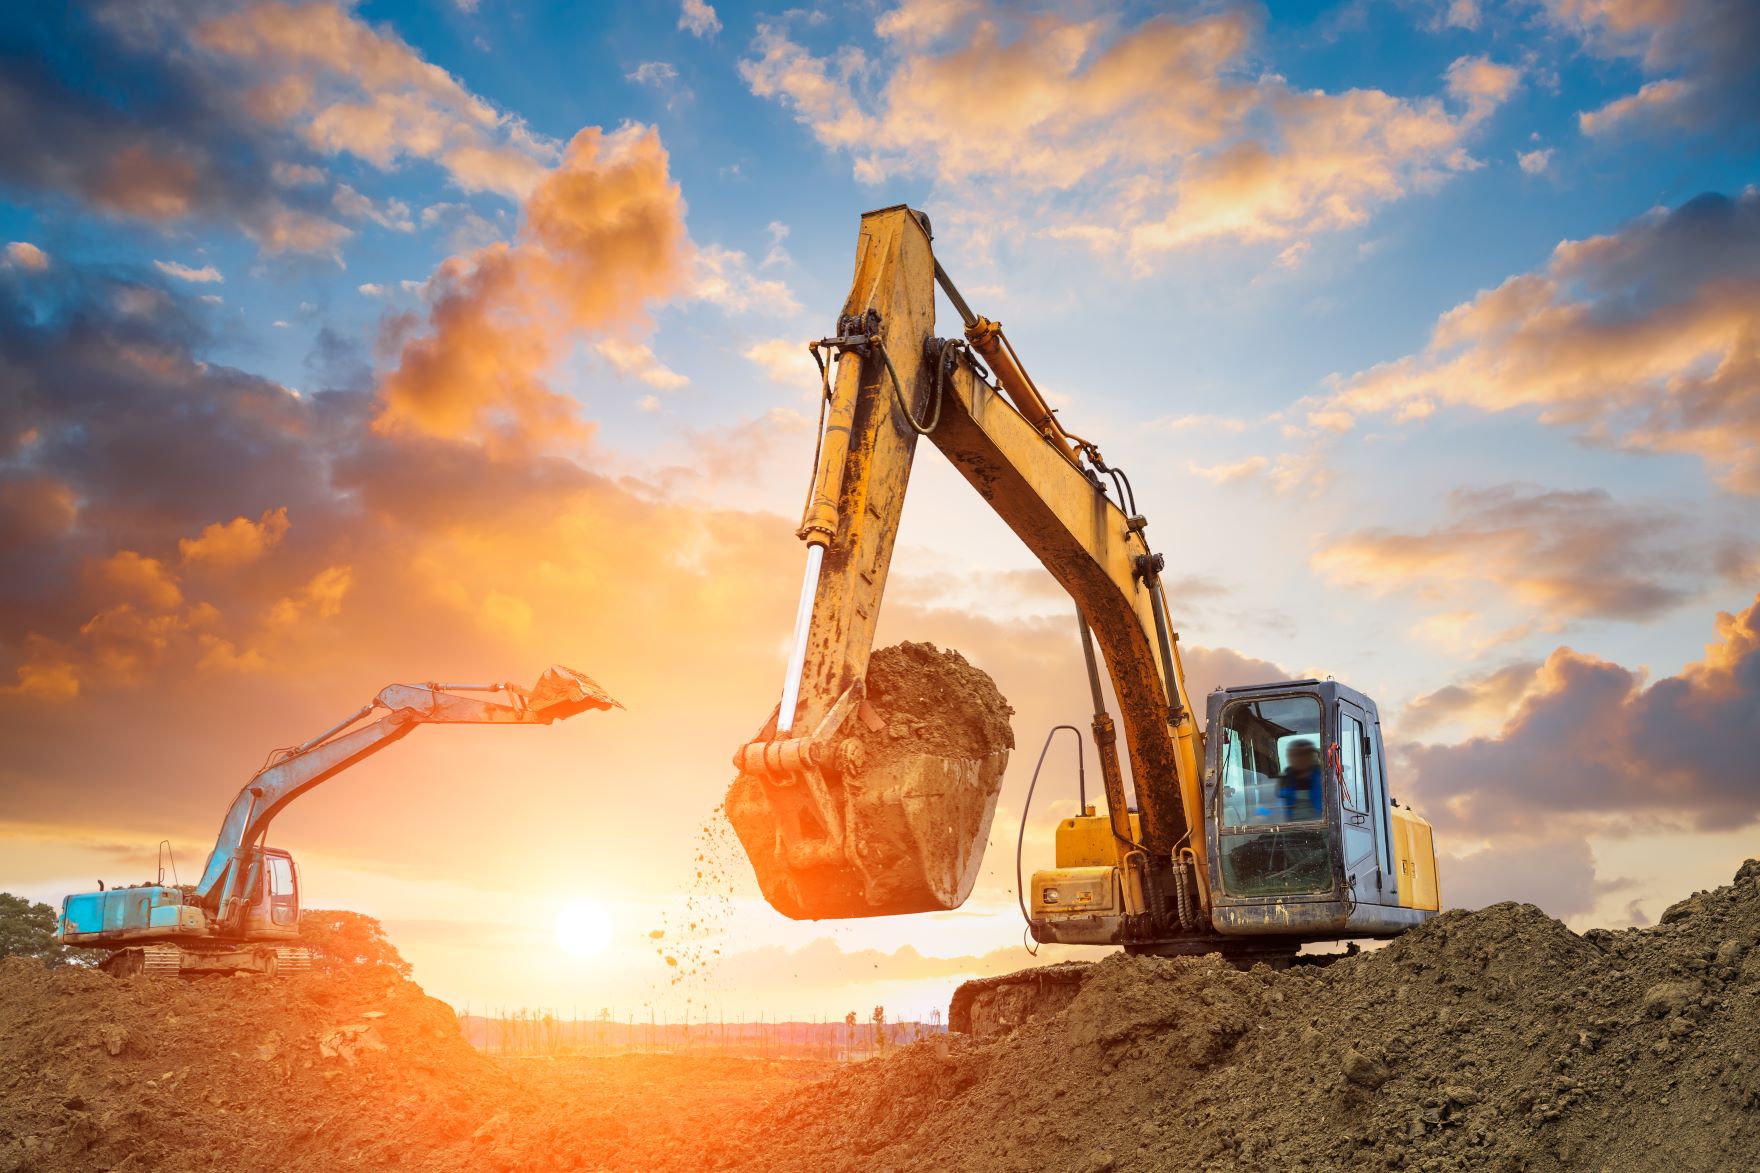 UK Construction equipment sales showed growth in August